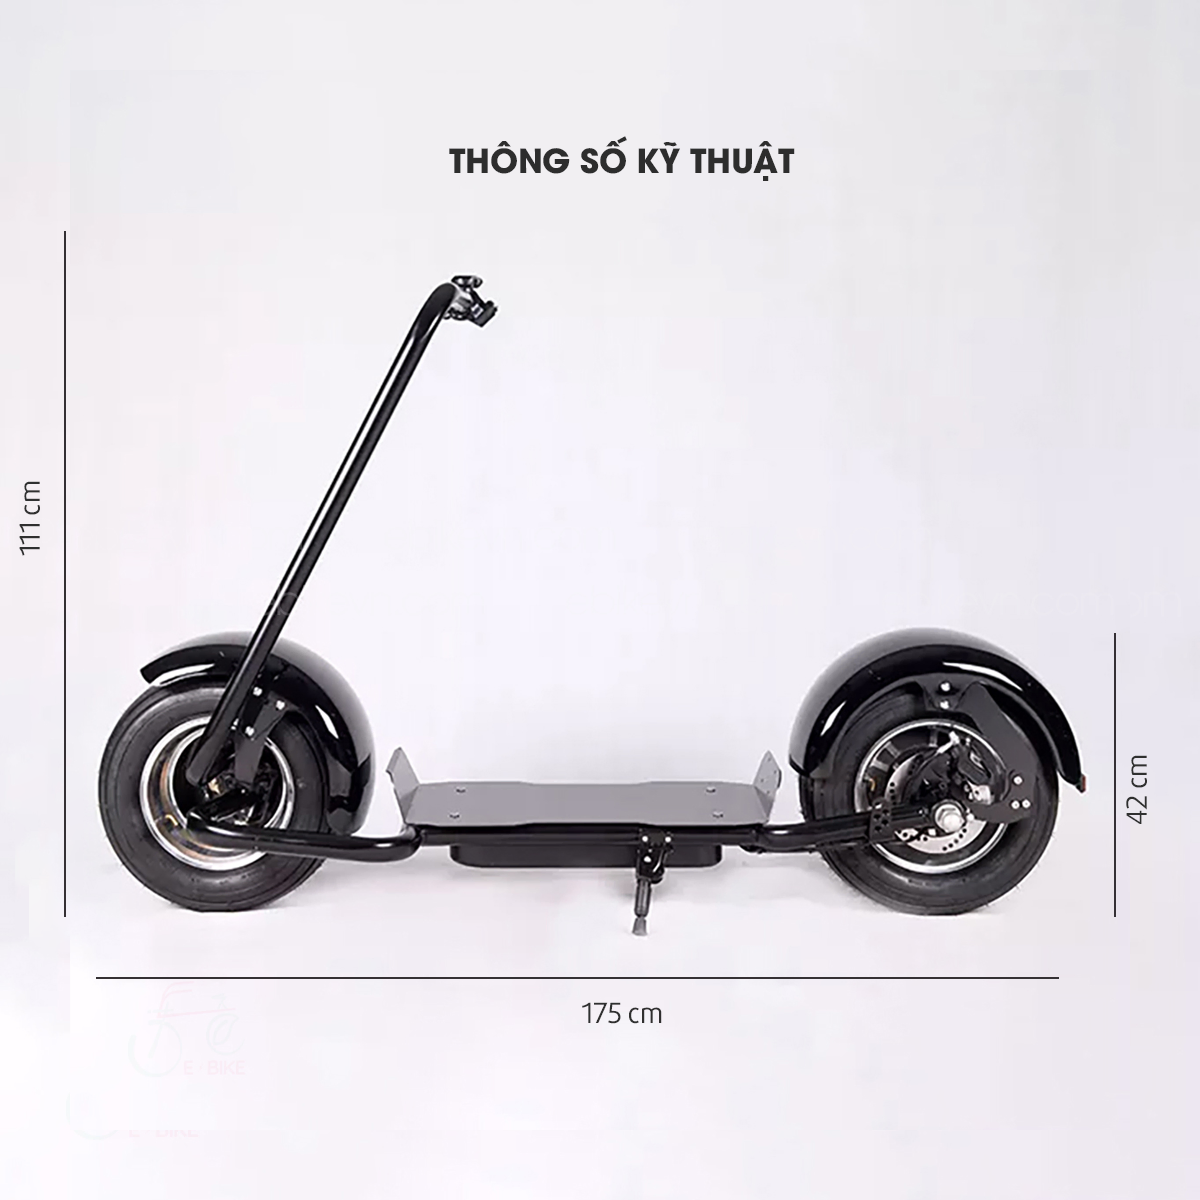 Thong So Ky Thuat S5 Scooter Ebikevn